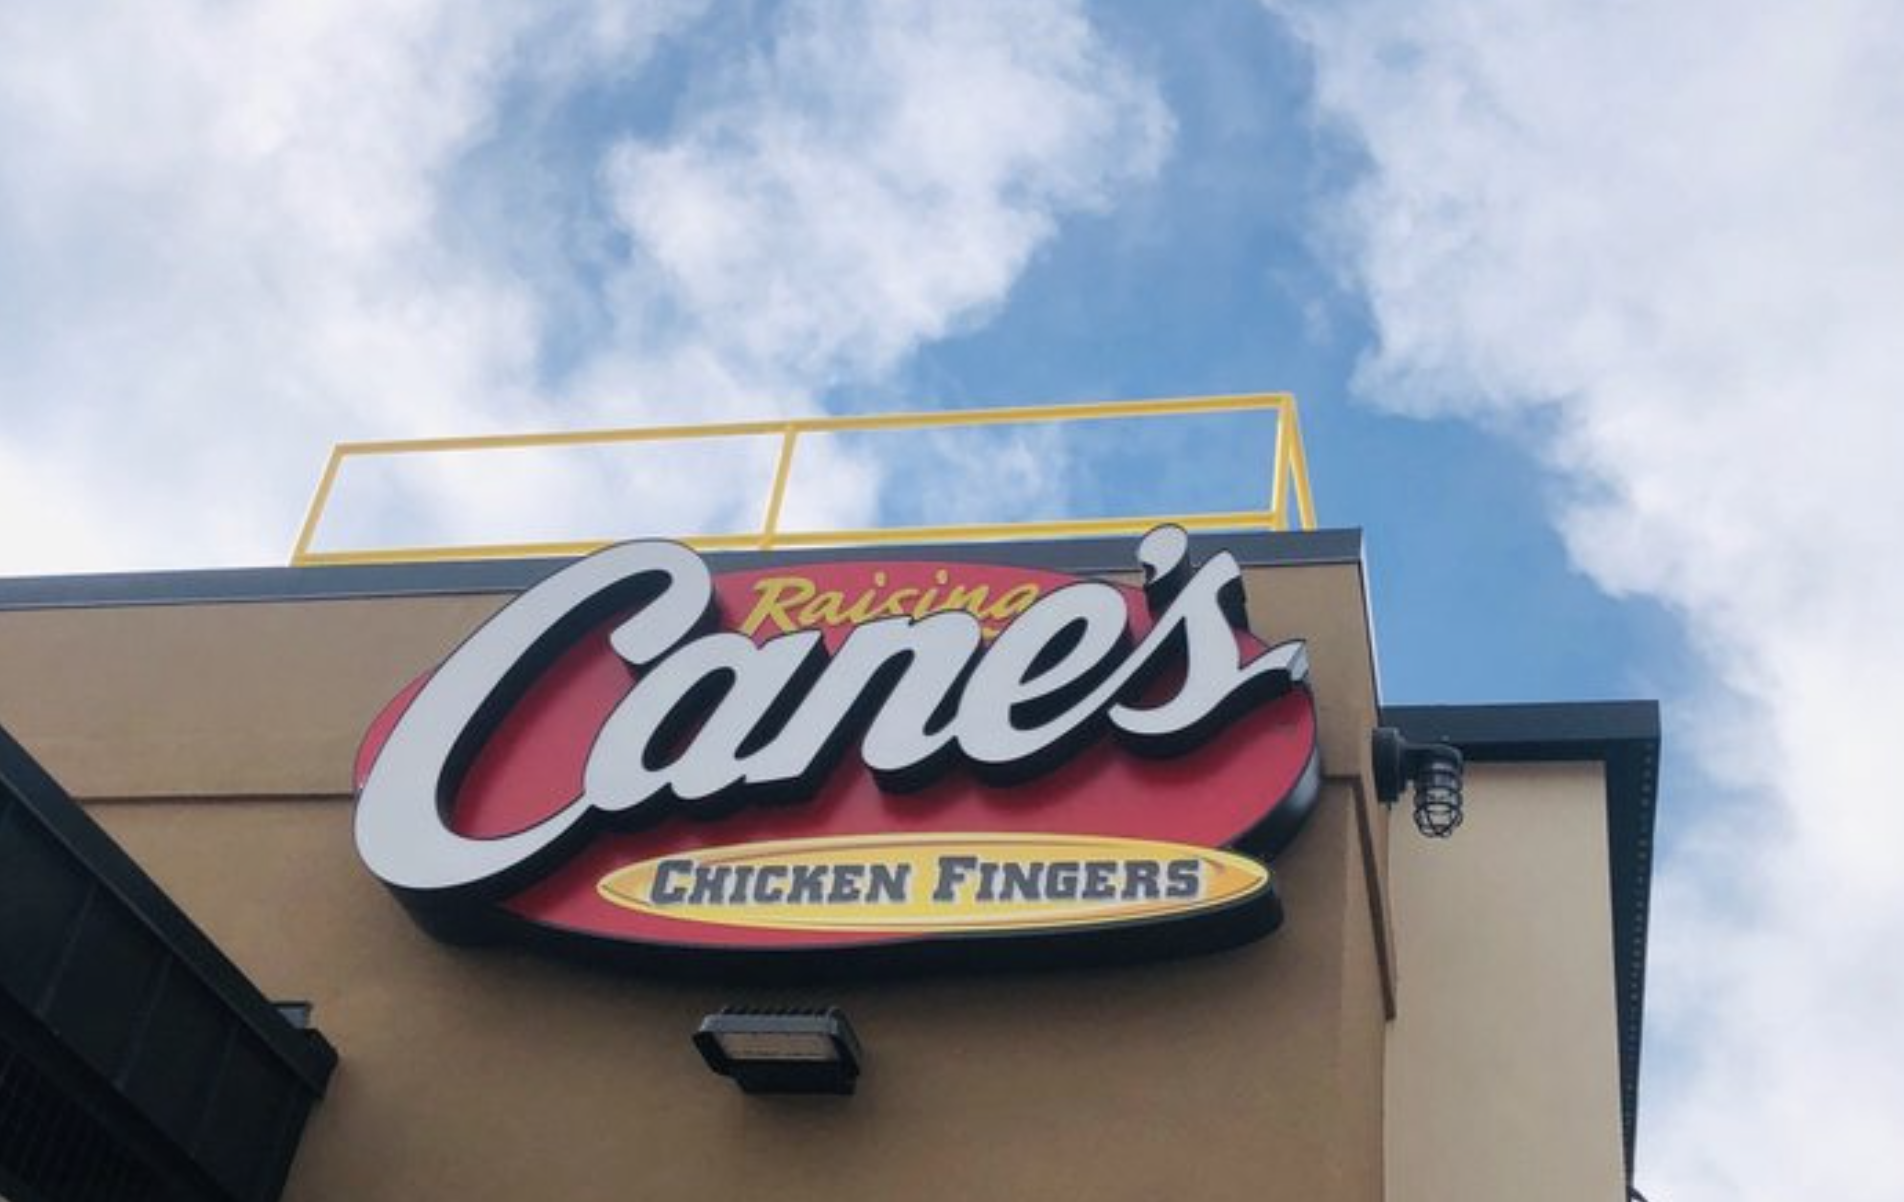 The famous fast food chain Raising Cane’s is finally arriving in the Bay Area